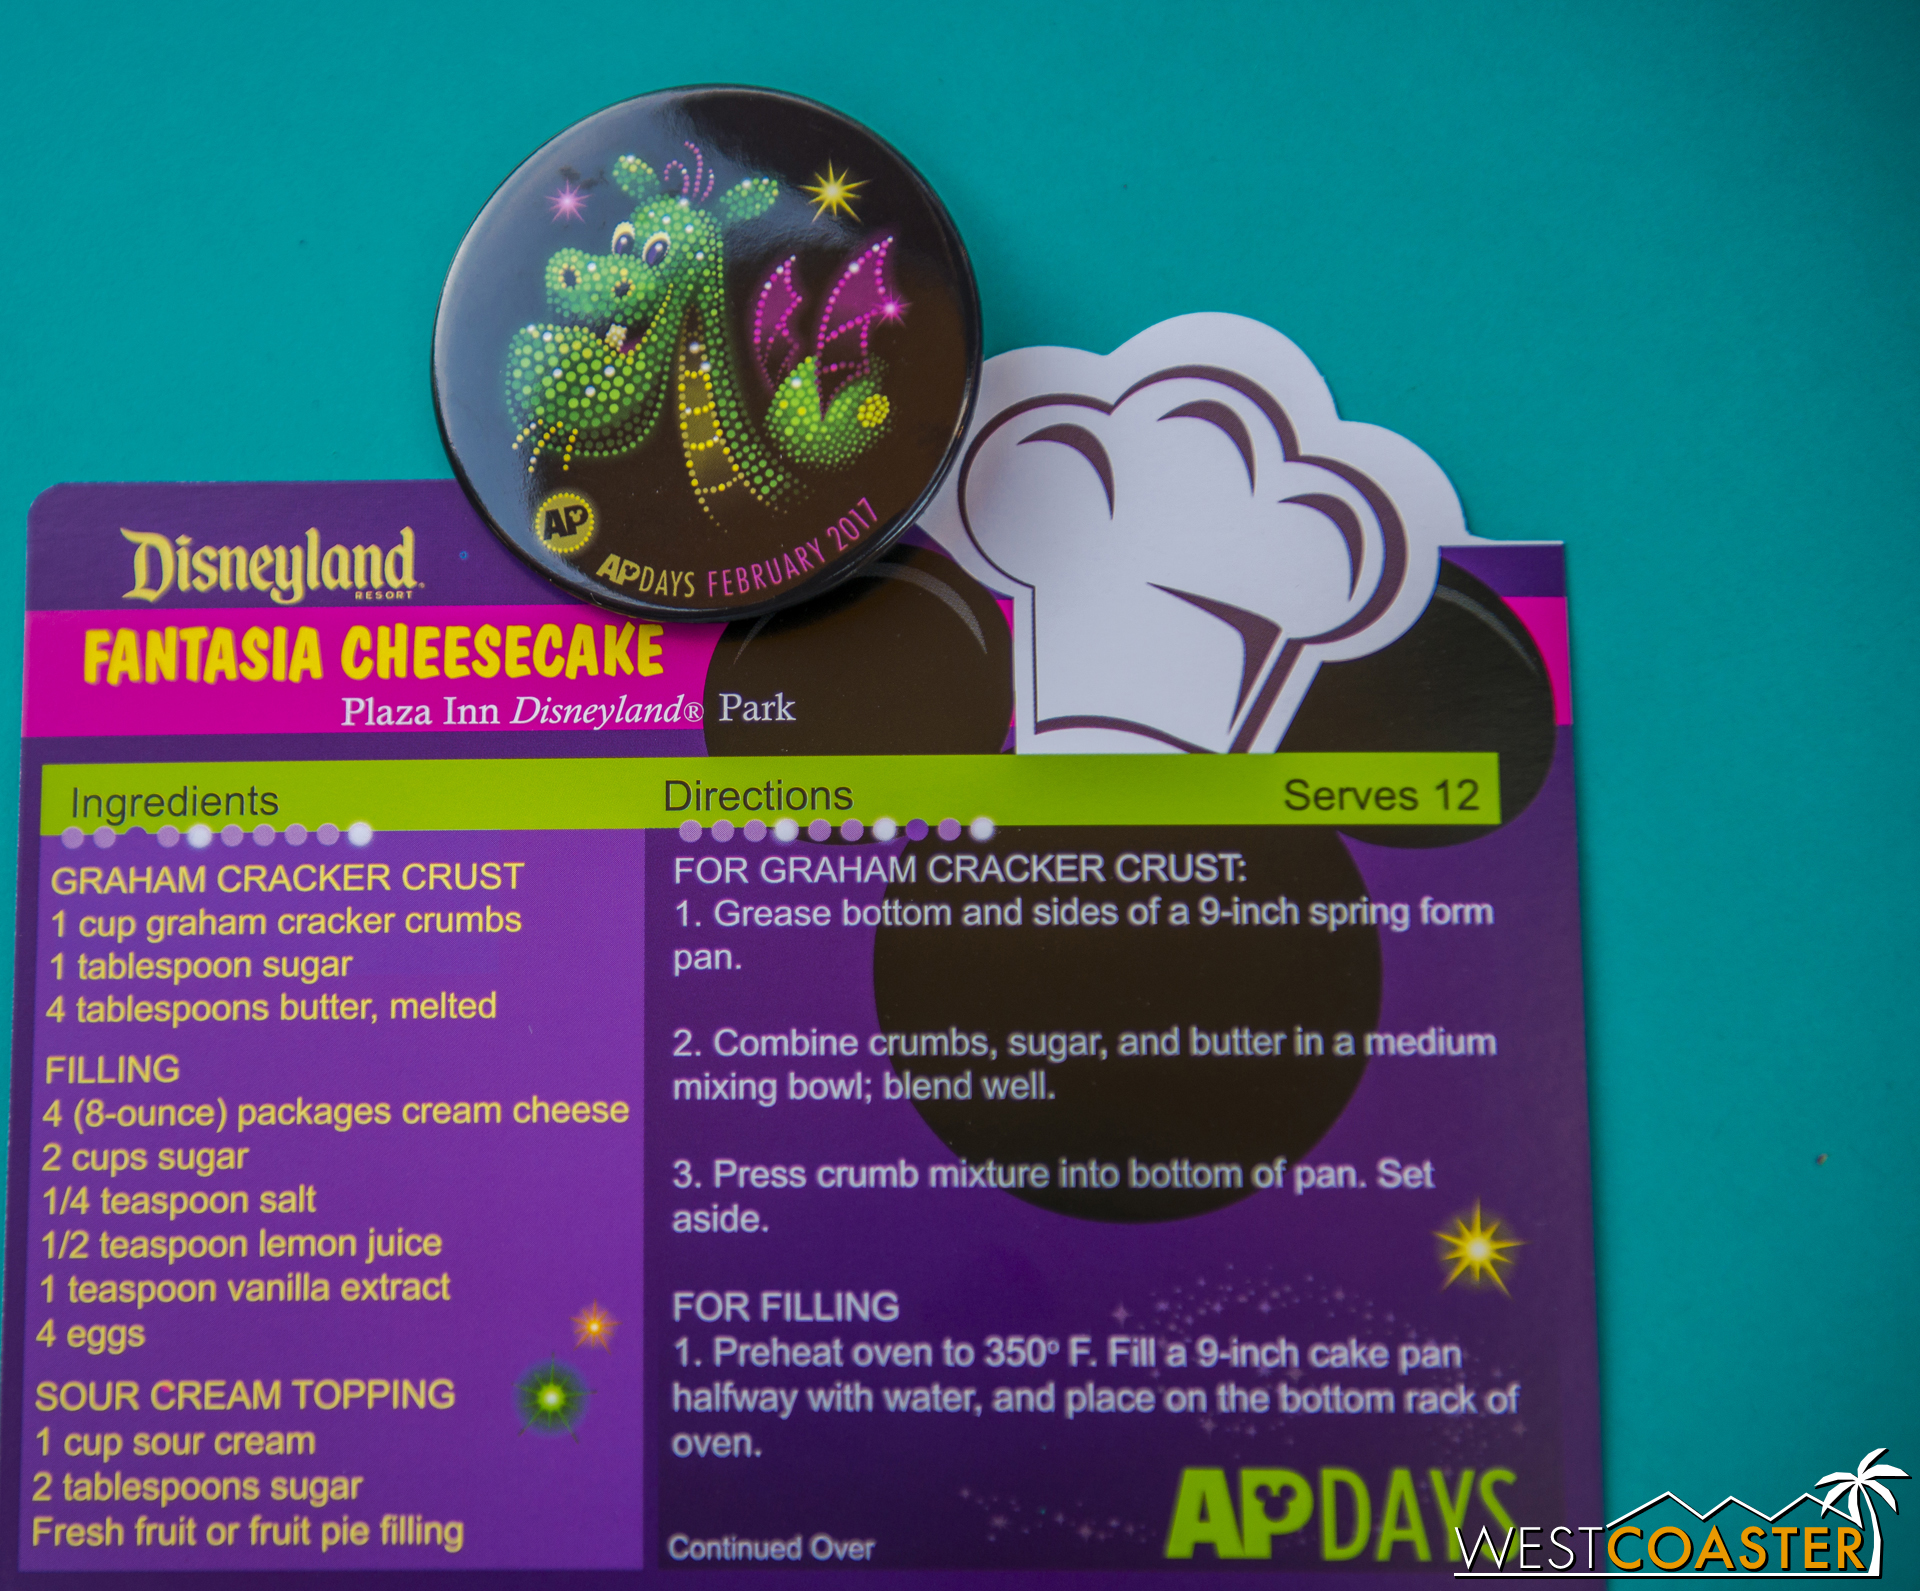  It's the last week of AP Days. &nbsp;This week's AP button features Elliott the dragon, and the recipe card provides instructions on making cheesecake! &nbsp;A pretty sweet deal, if you ask me. 